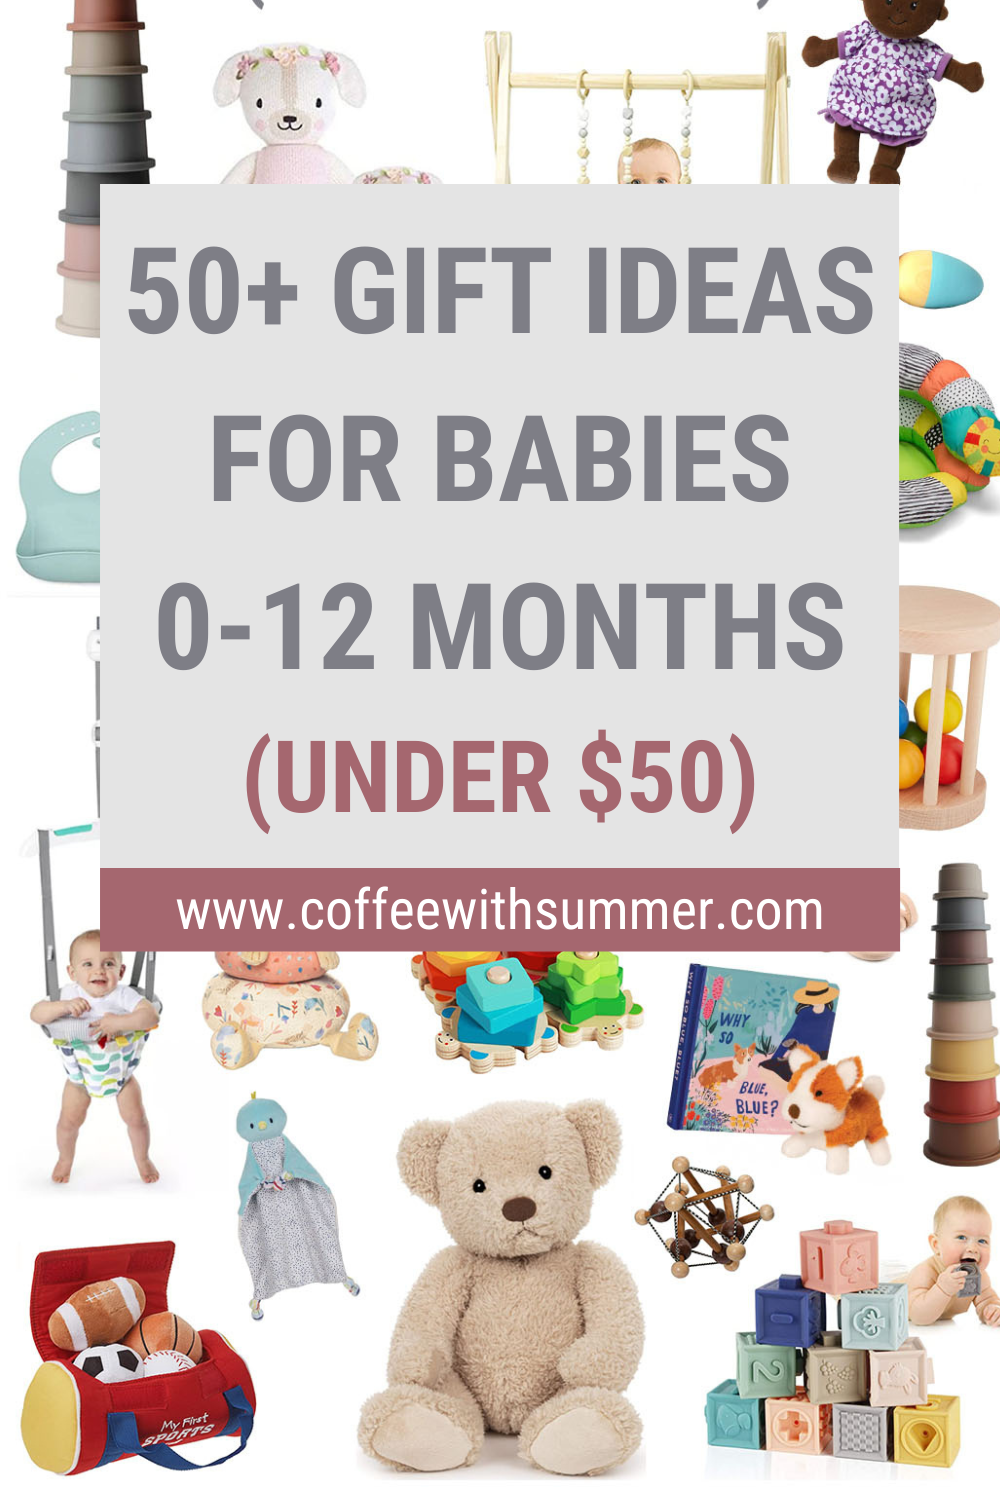 50+ Gift Ideas For Babies